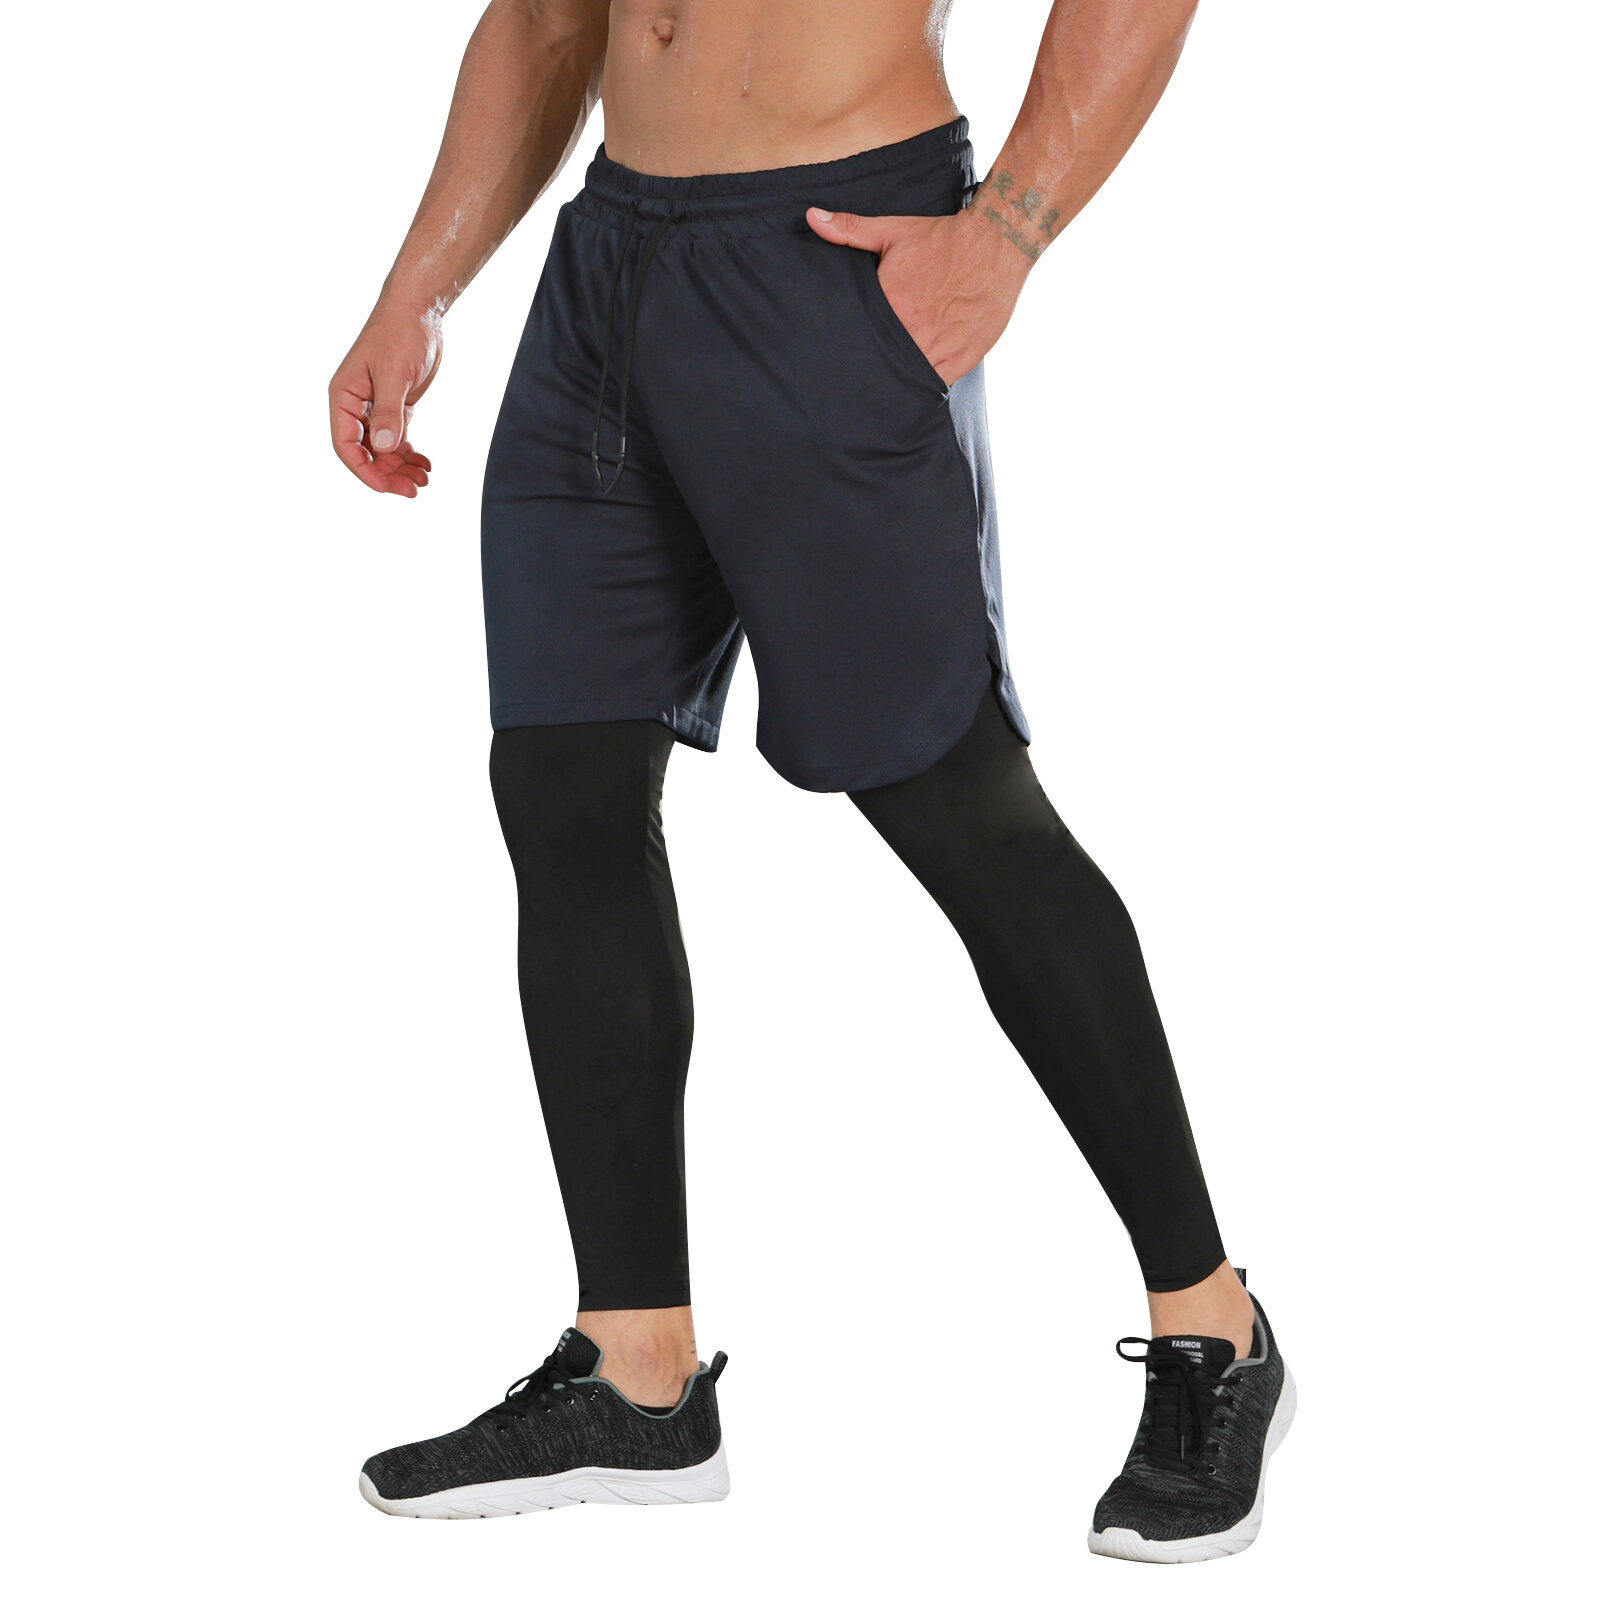 Mens Workout Shorts Sports Wear Running Tights Gym Leggings Tights